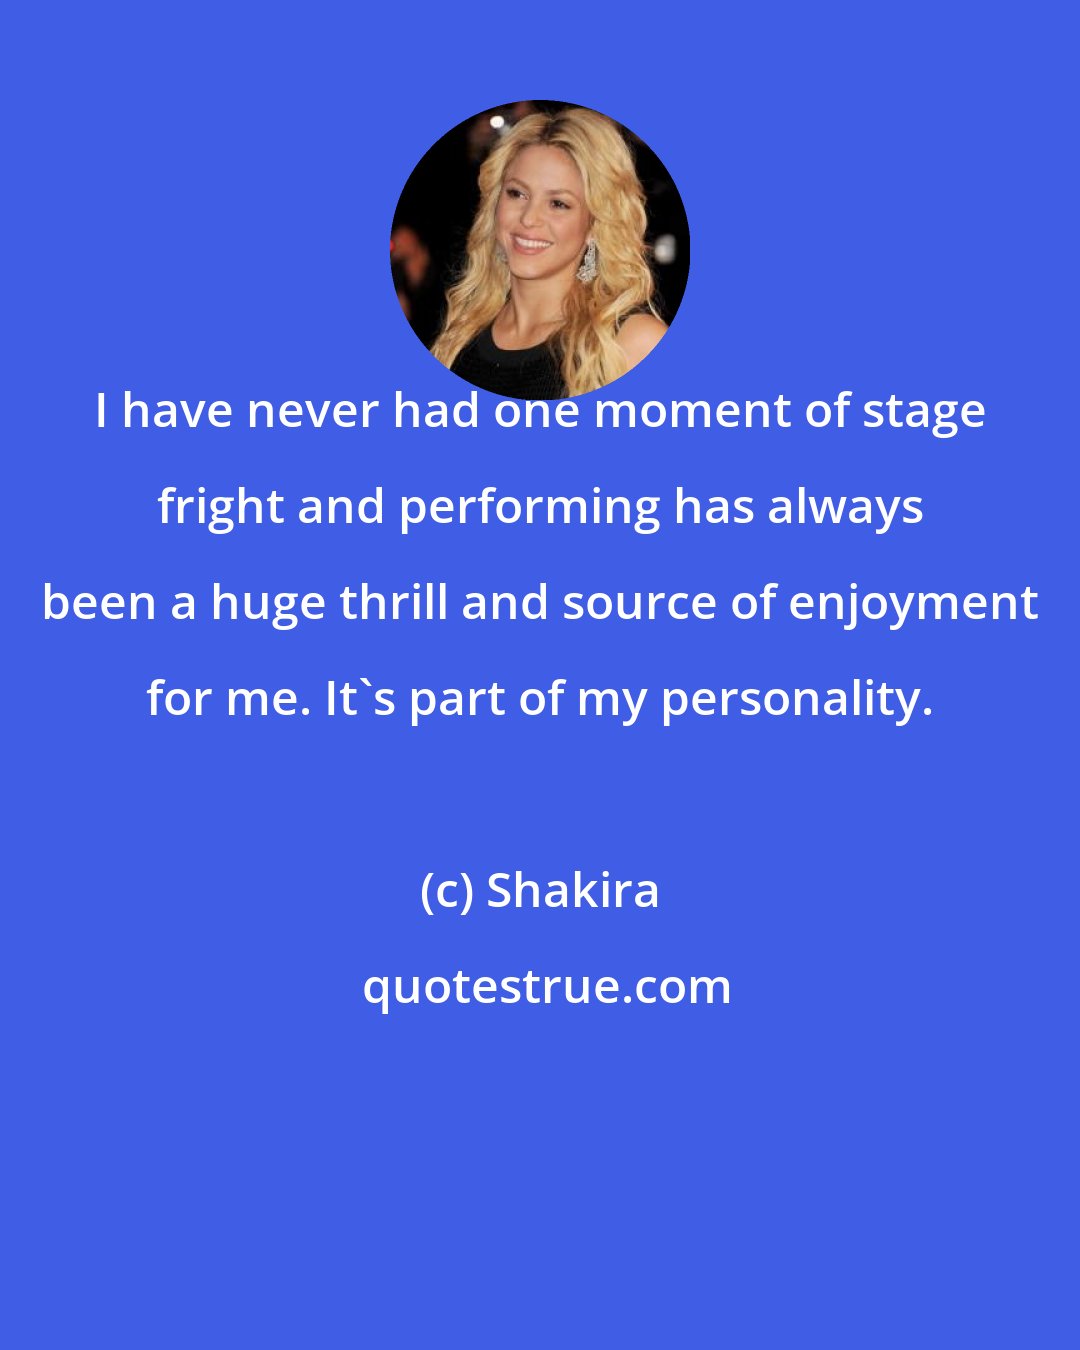 Shakira: I have never had one moment of stage fright and performing has always been a huge thrill and source of enjoyment for me. It's part of my personality.